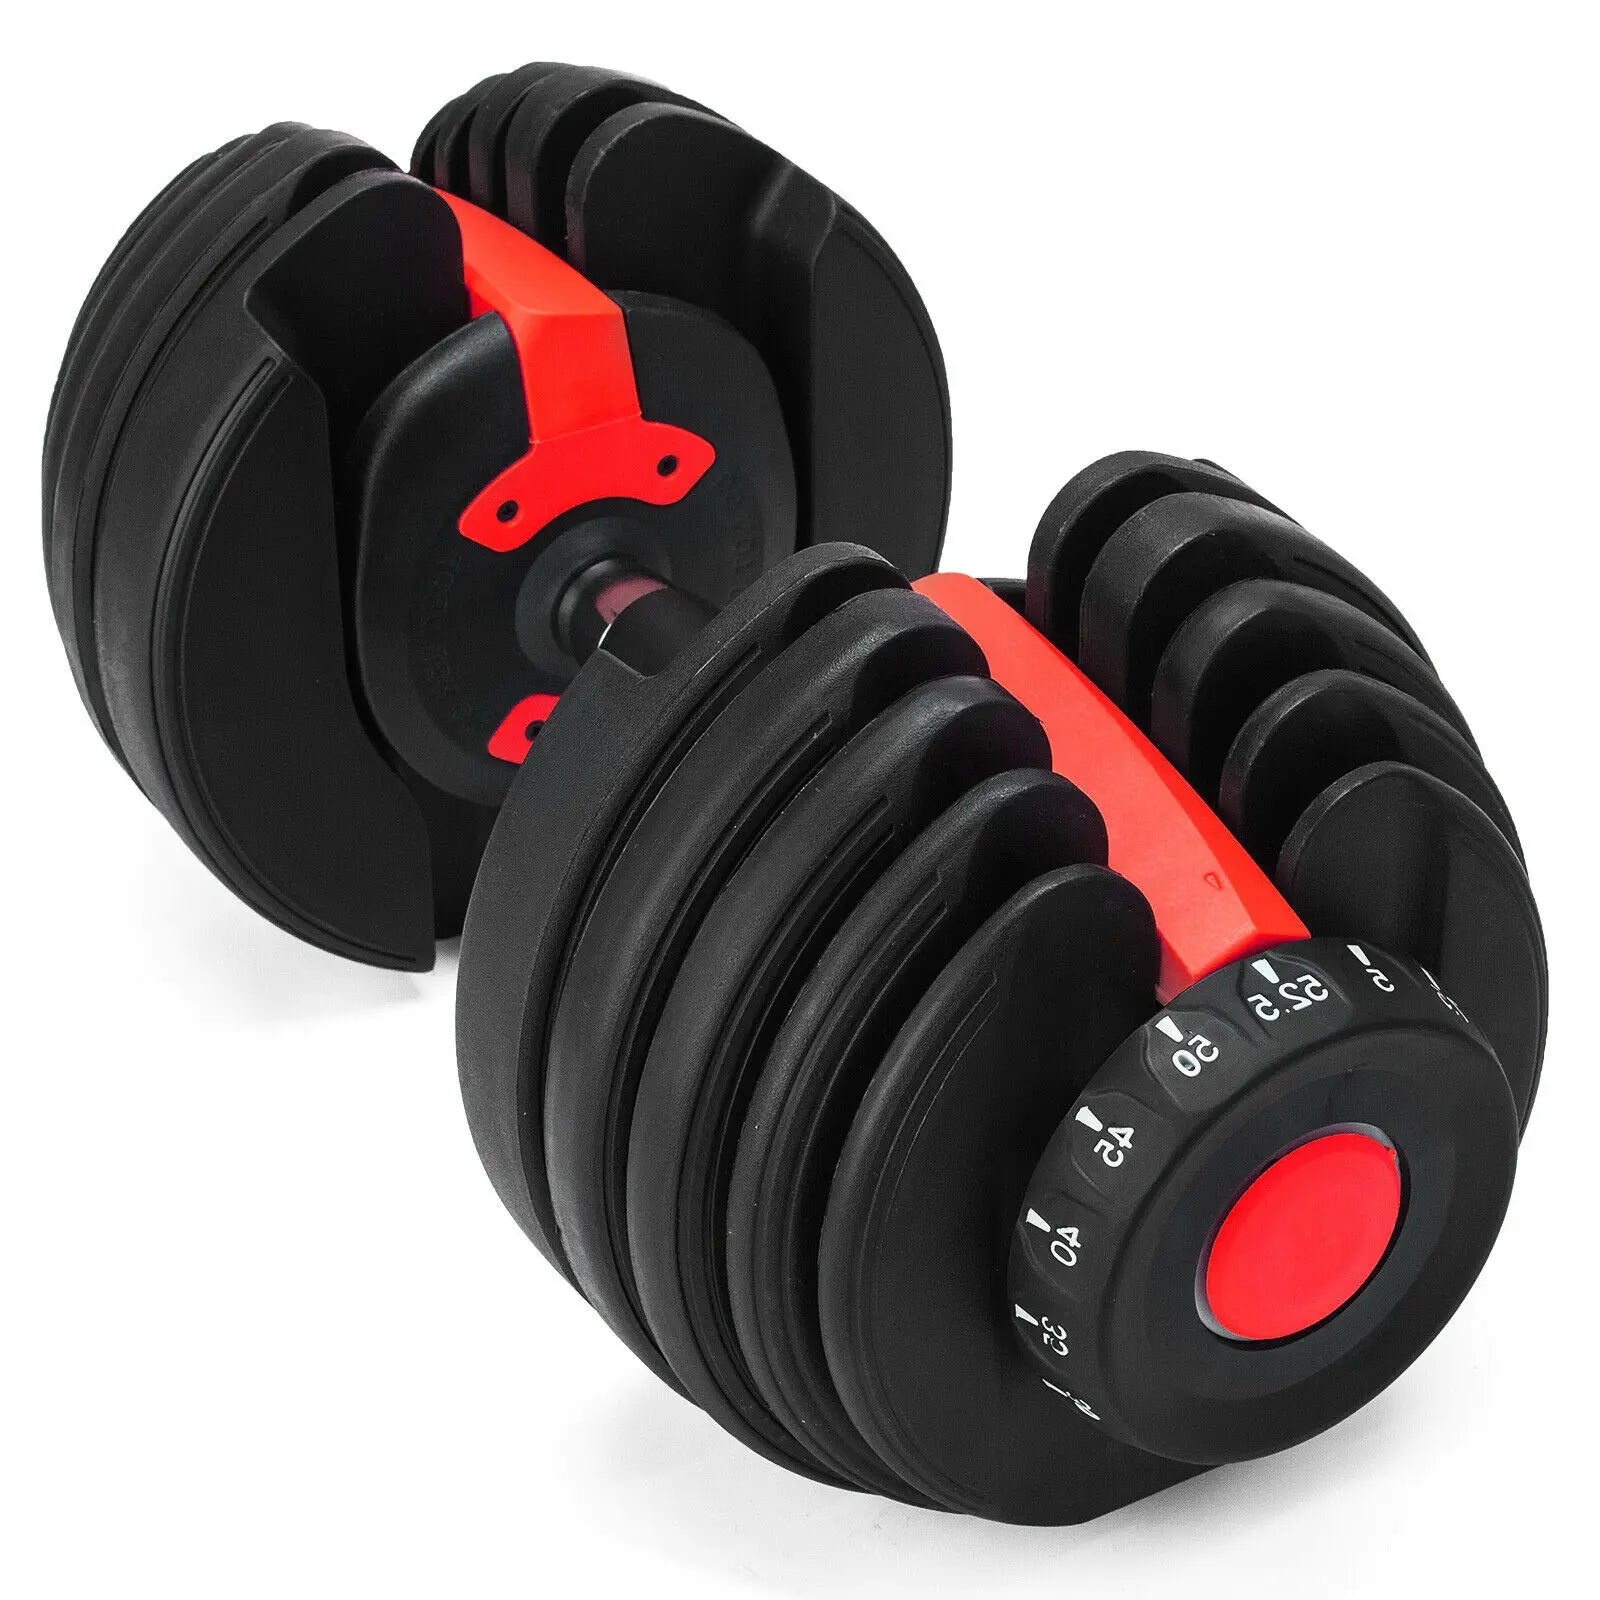 Adjustable Dumbbell Fitness Workouts dumbbells 24KG tone your strength and build your muscles 5-52.5lbs